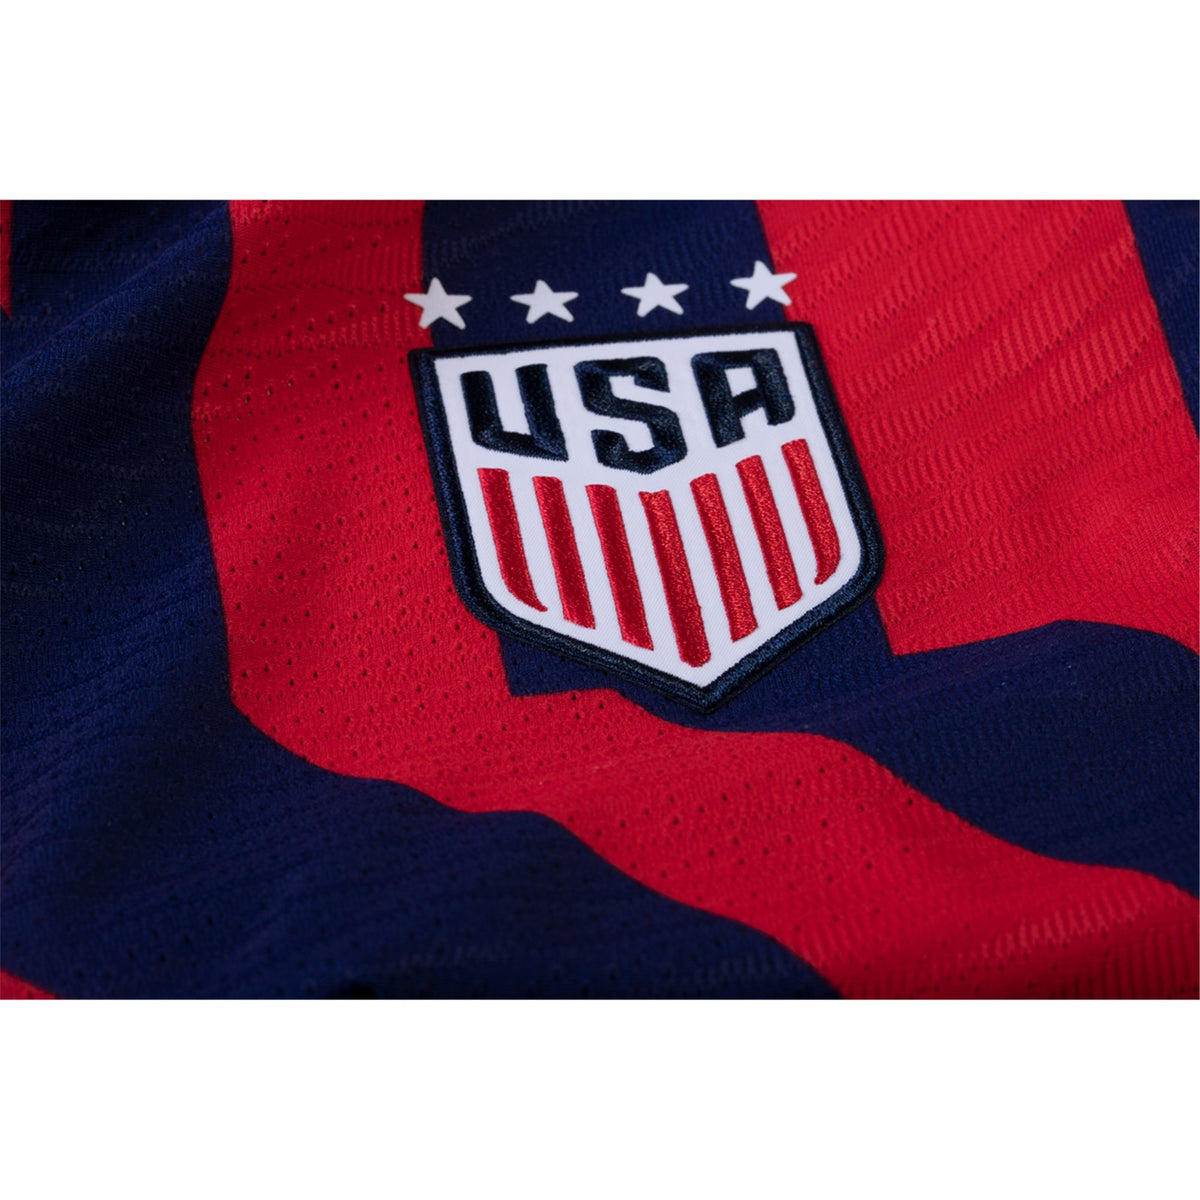 2017 Nike USA Gold Cup Jersey